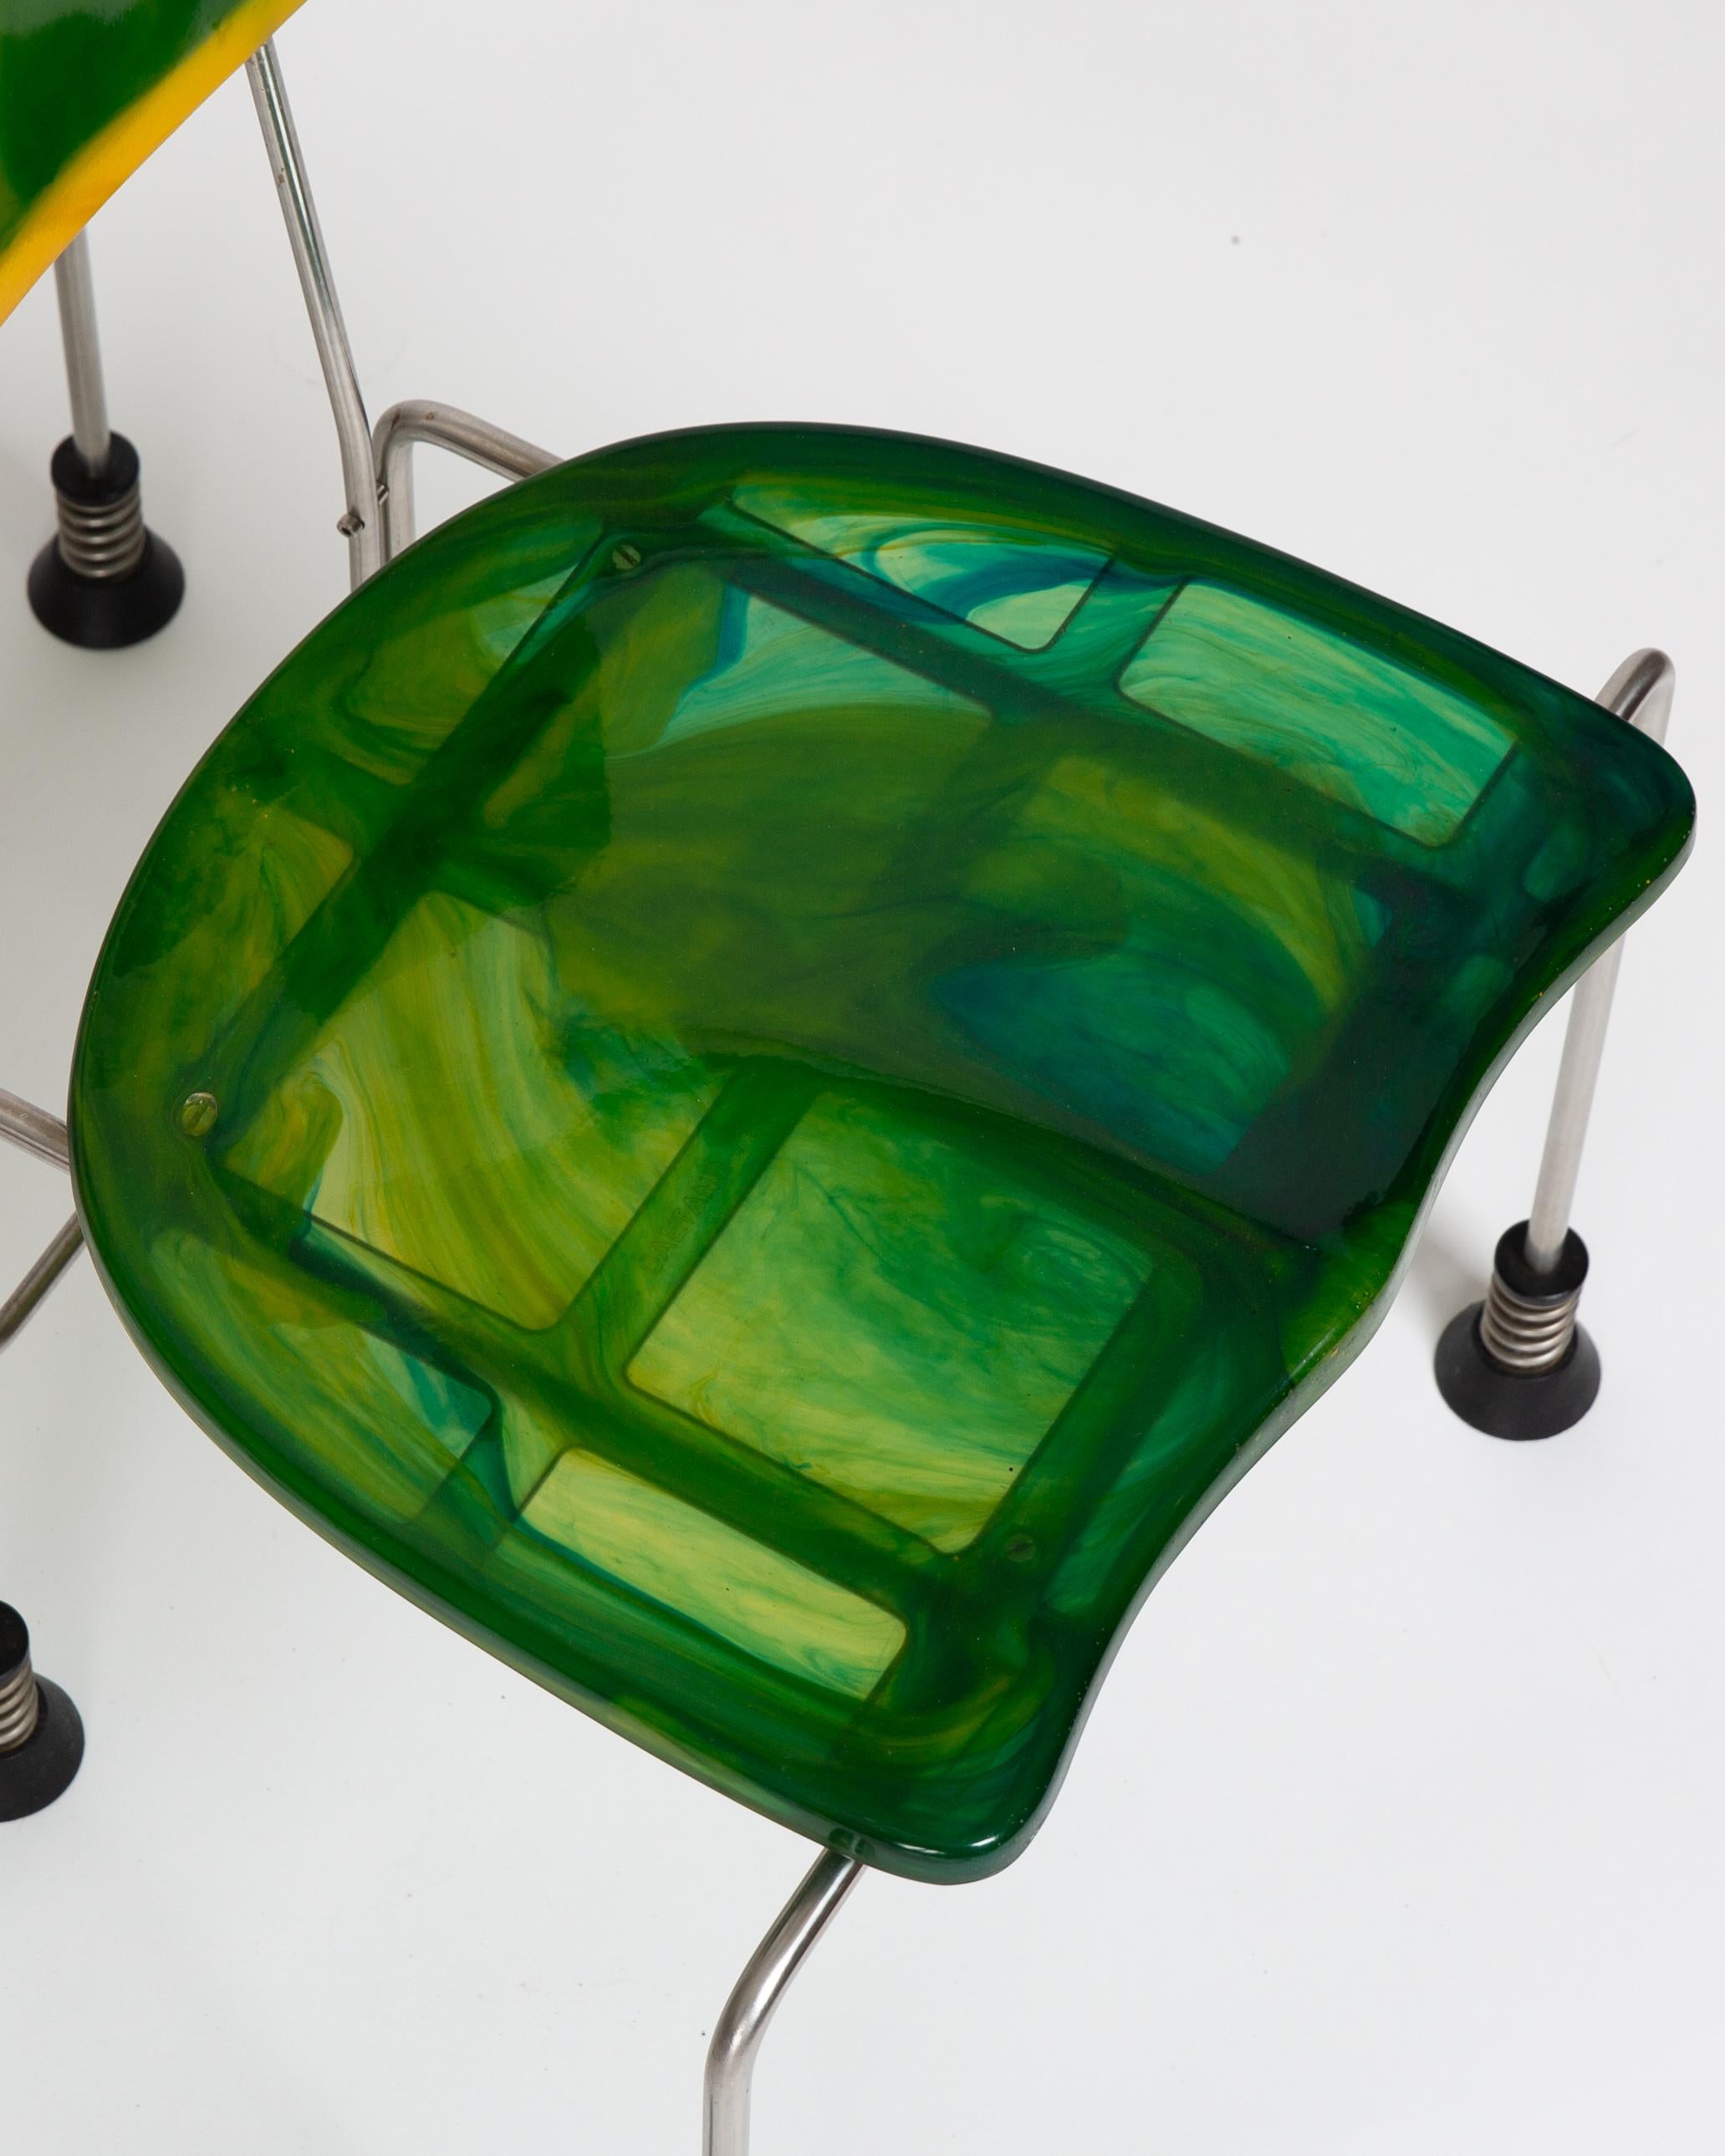 A set of 4 extremely uncommon Broadway Chairs produced by Bernini. 
Each chair is unique and both seat and back are casted in a green/yellow resin. 
A frozen fluidity - portrait of art, science and time or perhaps resembling some swirled out smokey